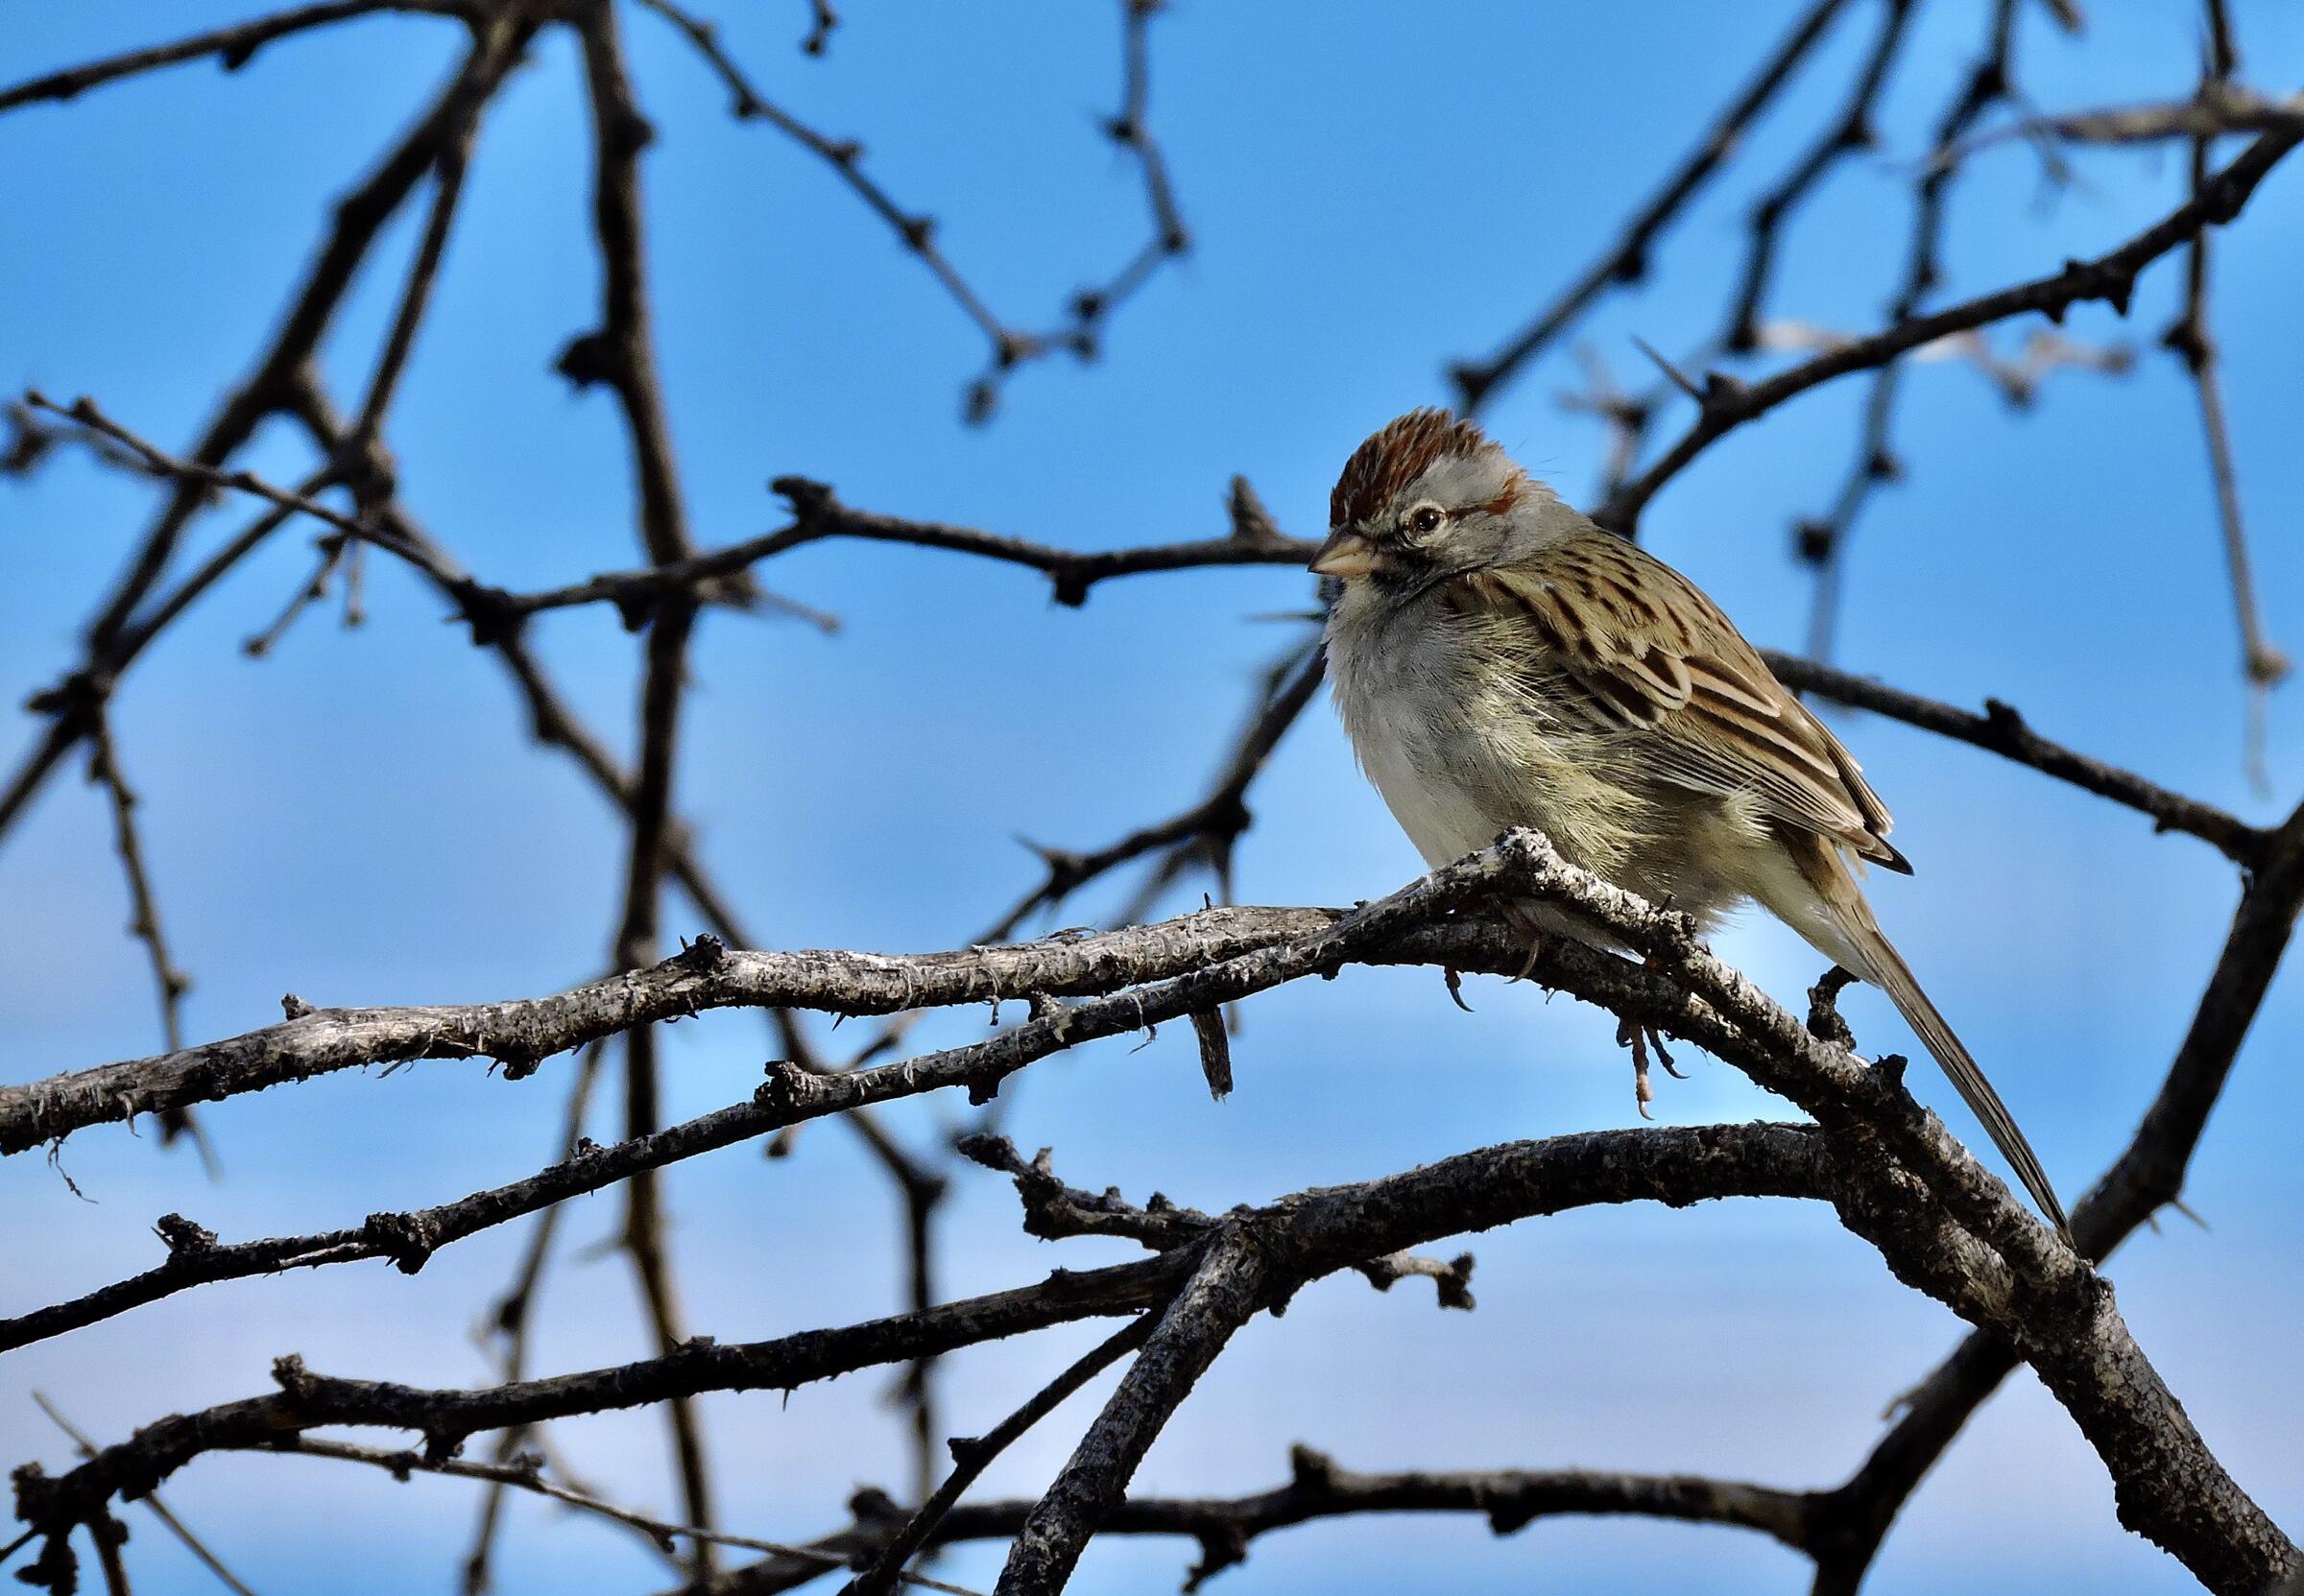 A Rufous-winged Sparrow perches within the branches of a mesquite tree against blue sky.